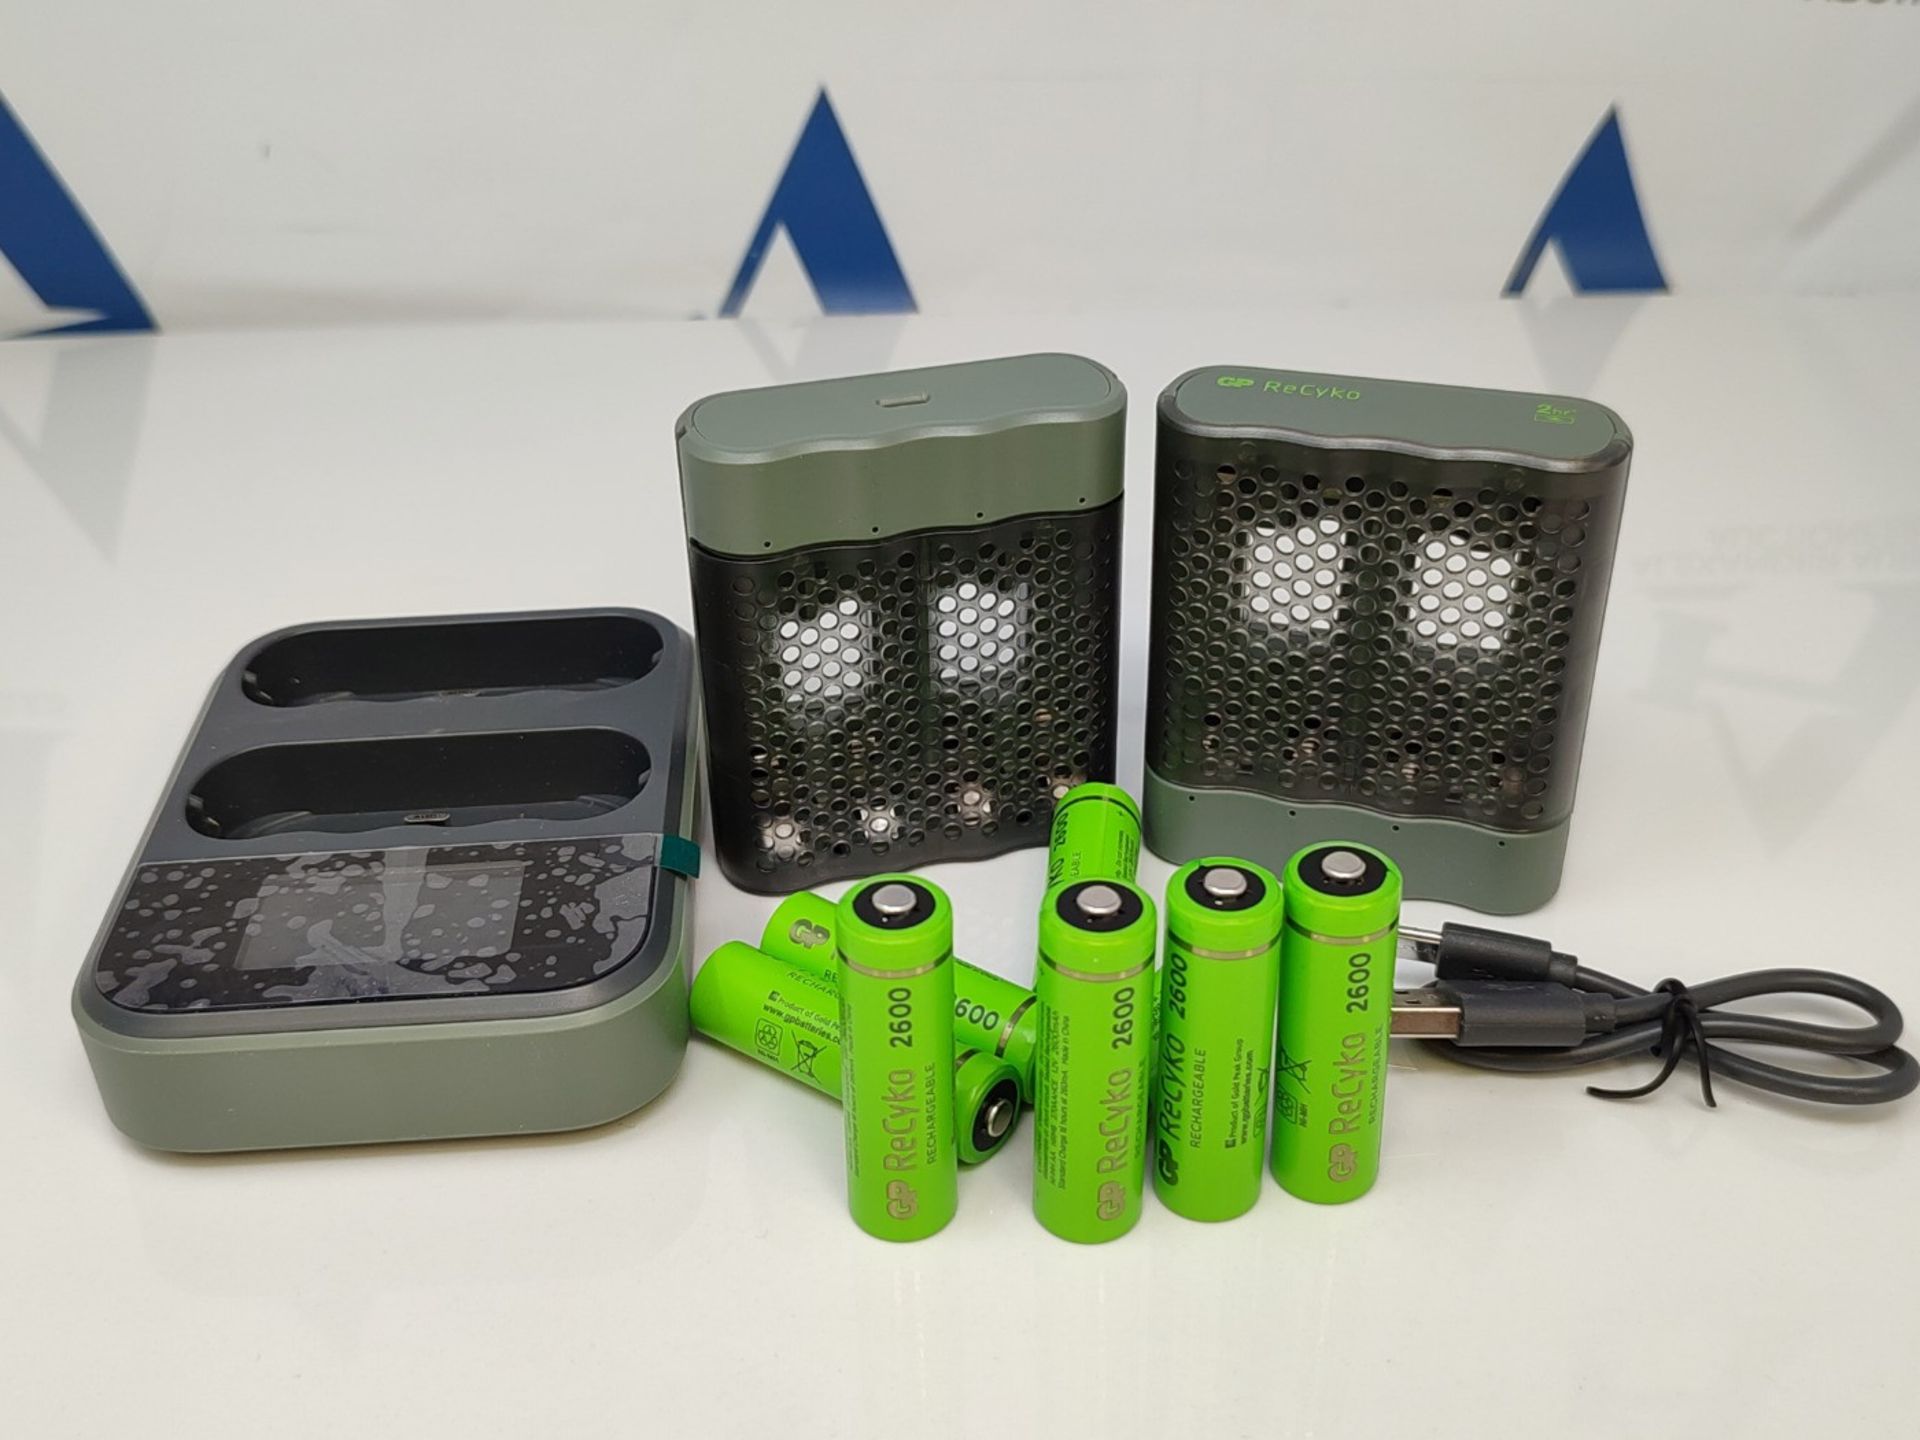 Quick USB Charger with 8 Rechargeable AA Batteries 2600 mAh included and LED display | - Image 6 of 6